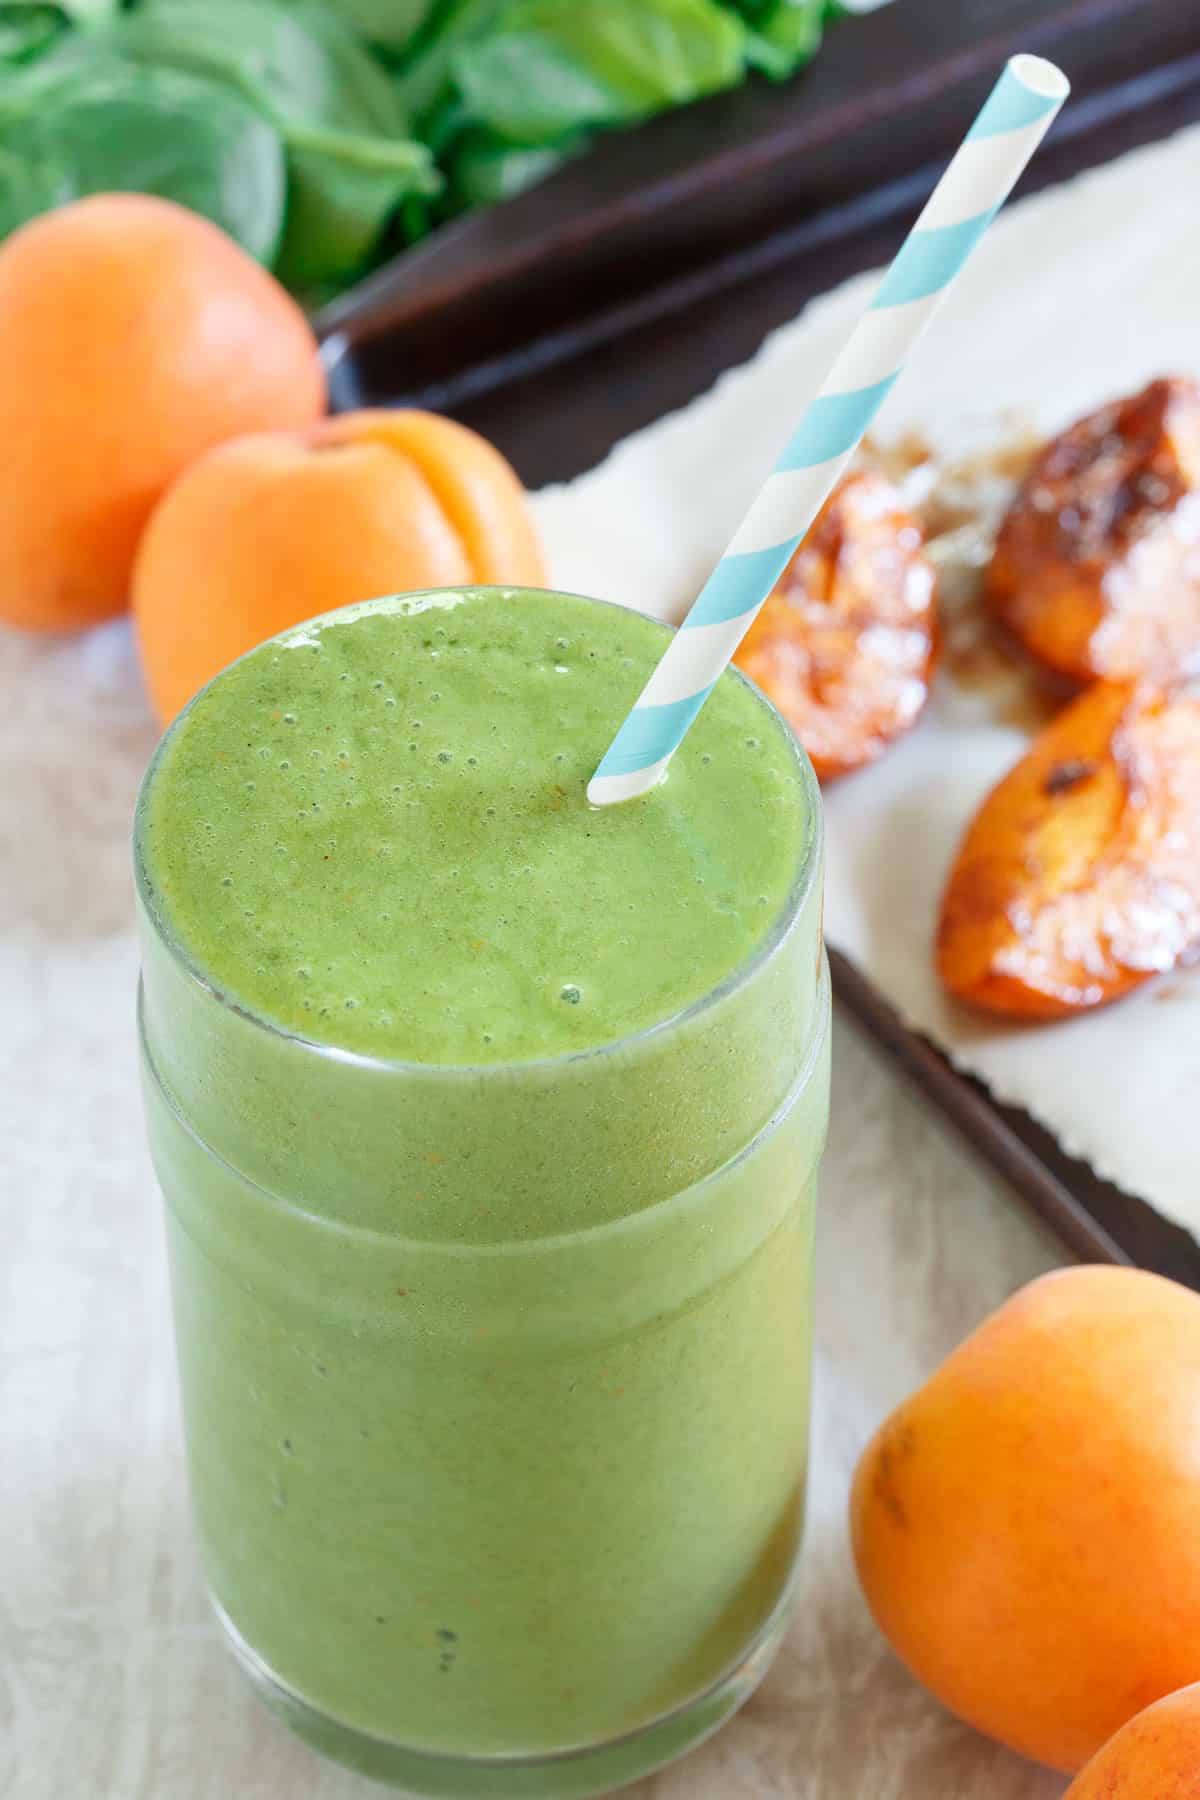 This roasted apricot smoothie gets a healthy green boost with spinach and natural spinach extract to help keep you feeling full longer!